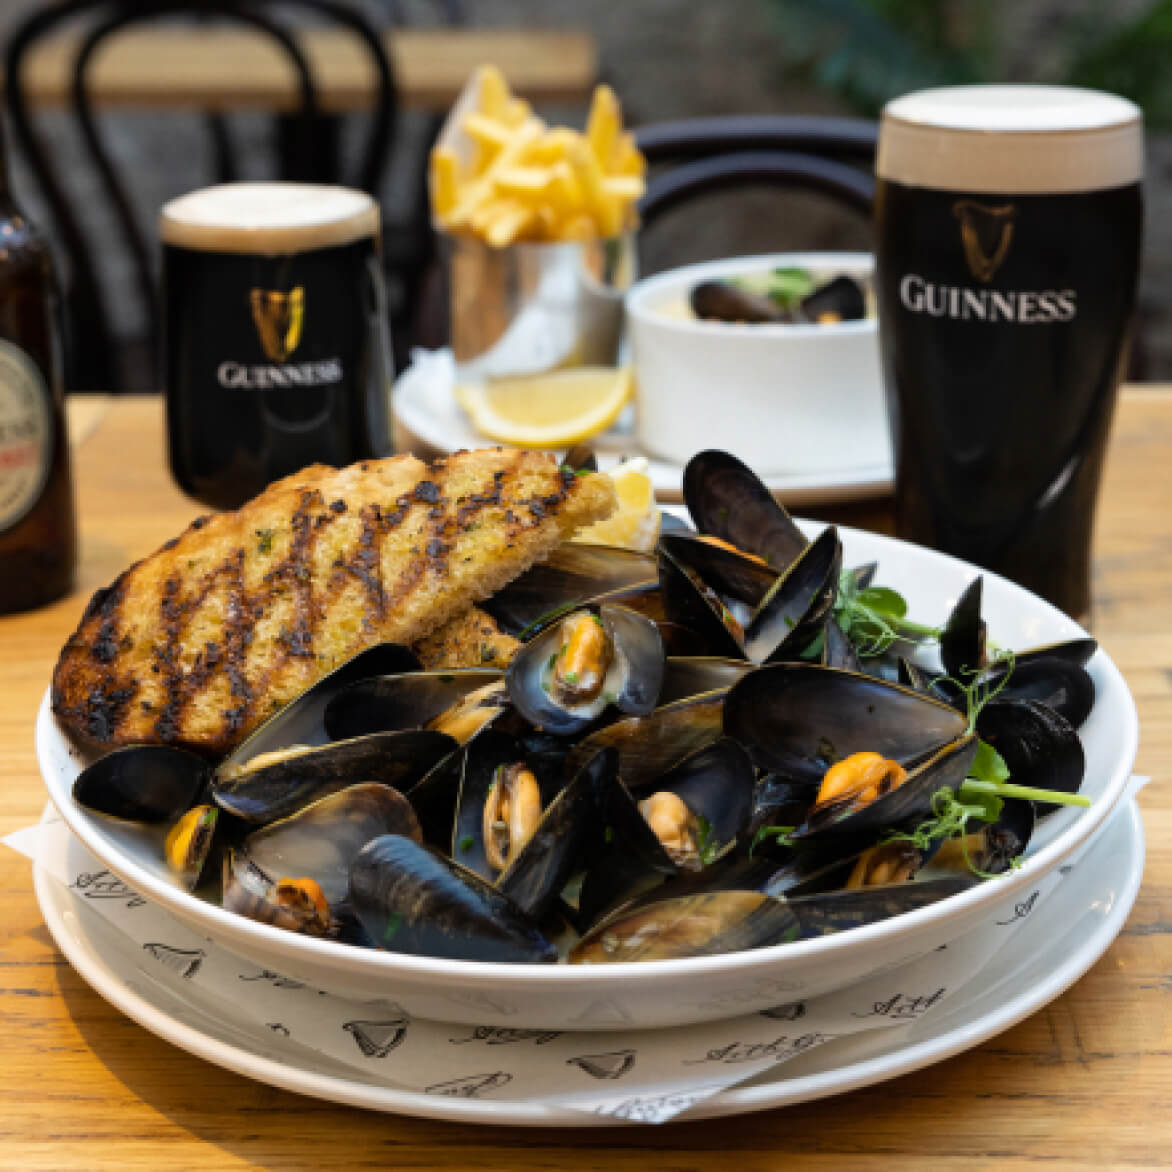 A supreme shot of our mussels and Guinness food pairing with the pints blurred in the background.